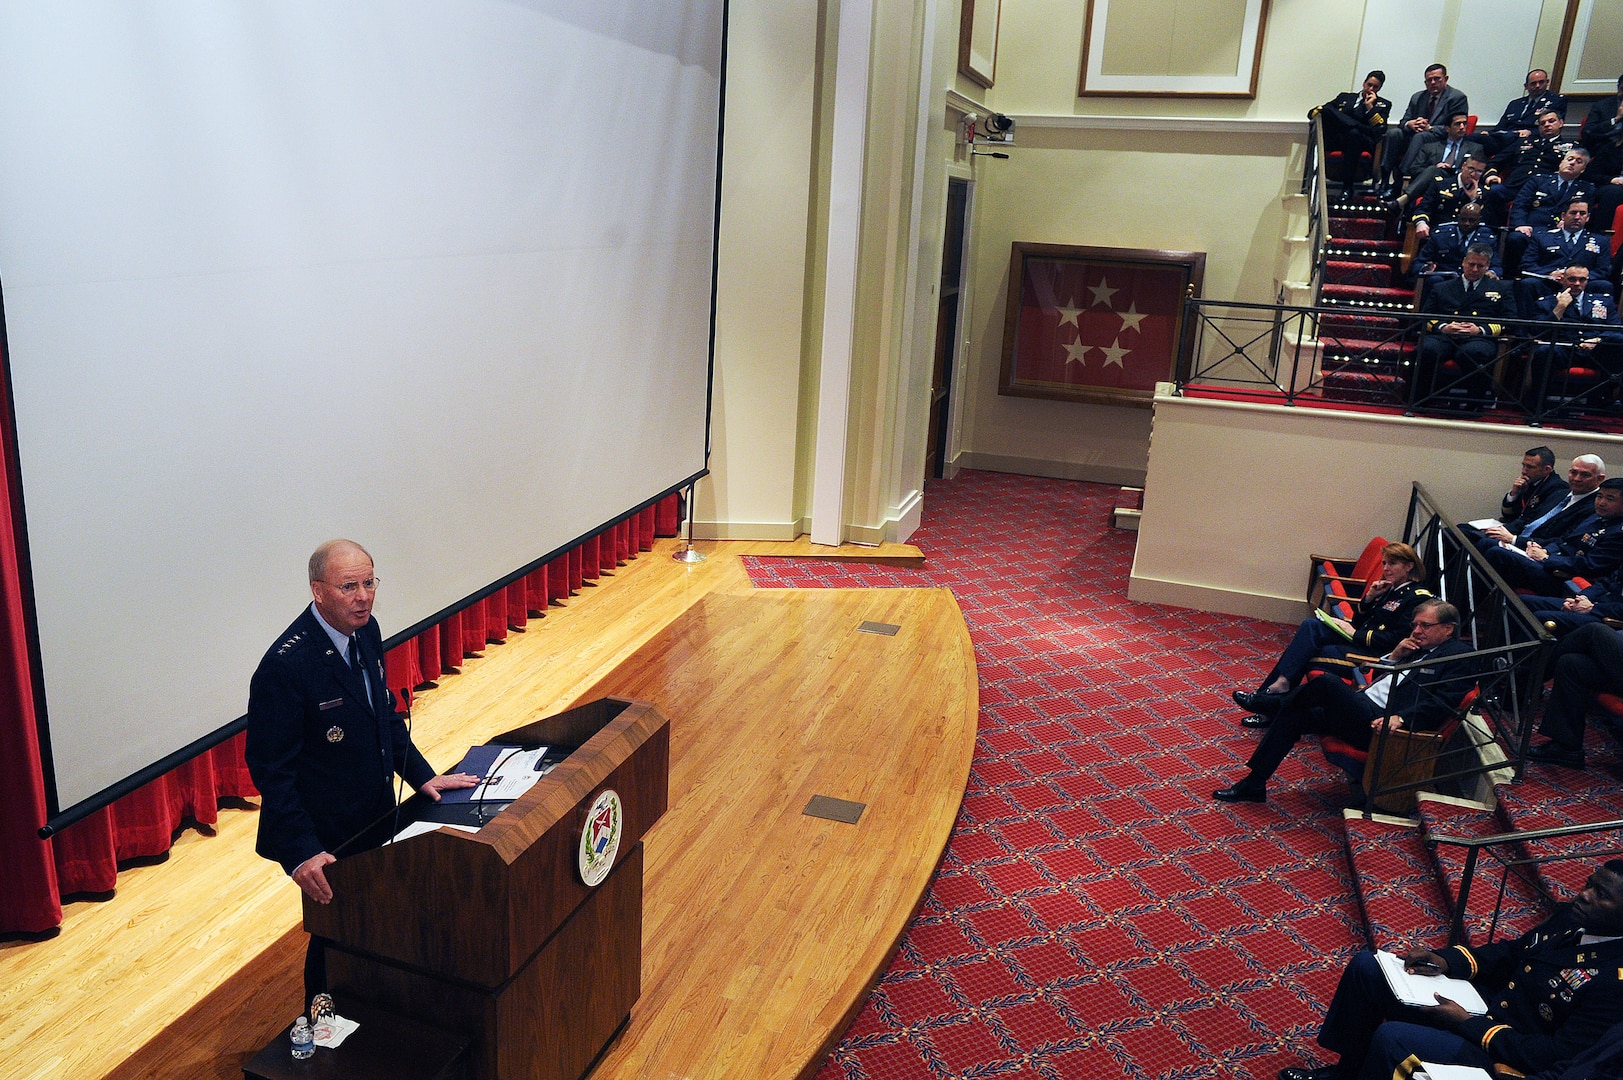 Air Force Gen. Craig McKinley, chief of the National Guard Bureau, addresses National War College students during a visit to the school at Fort Lesley J. McNair, Washington, D.C., on Feb. 8, 2012. McKinley touched on both how the skills learned at the school will be used in the years to come and the roles the National Guard fulfills. McKinley is a 1995 graduate of the college.